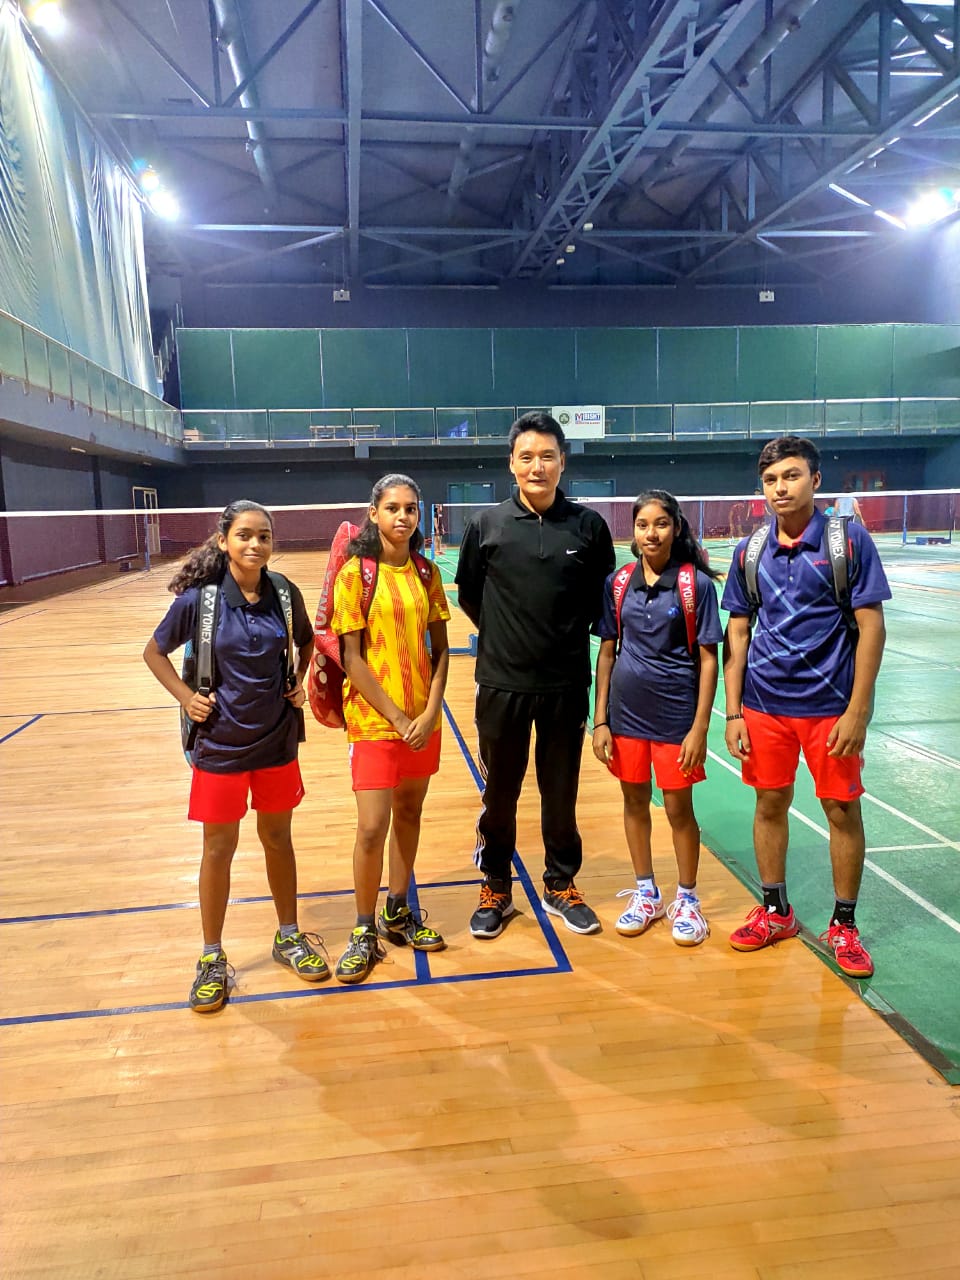 Chetan with 4 of his students at the Yonex academy 